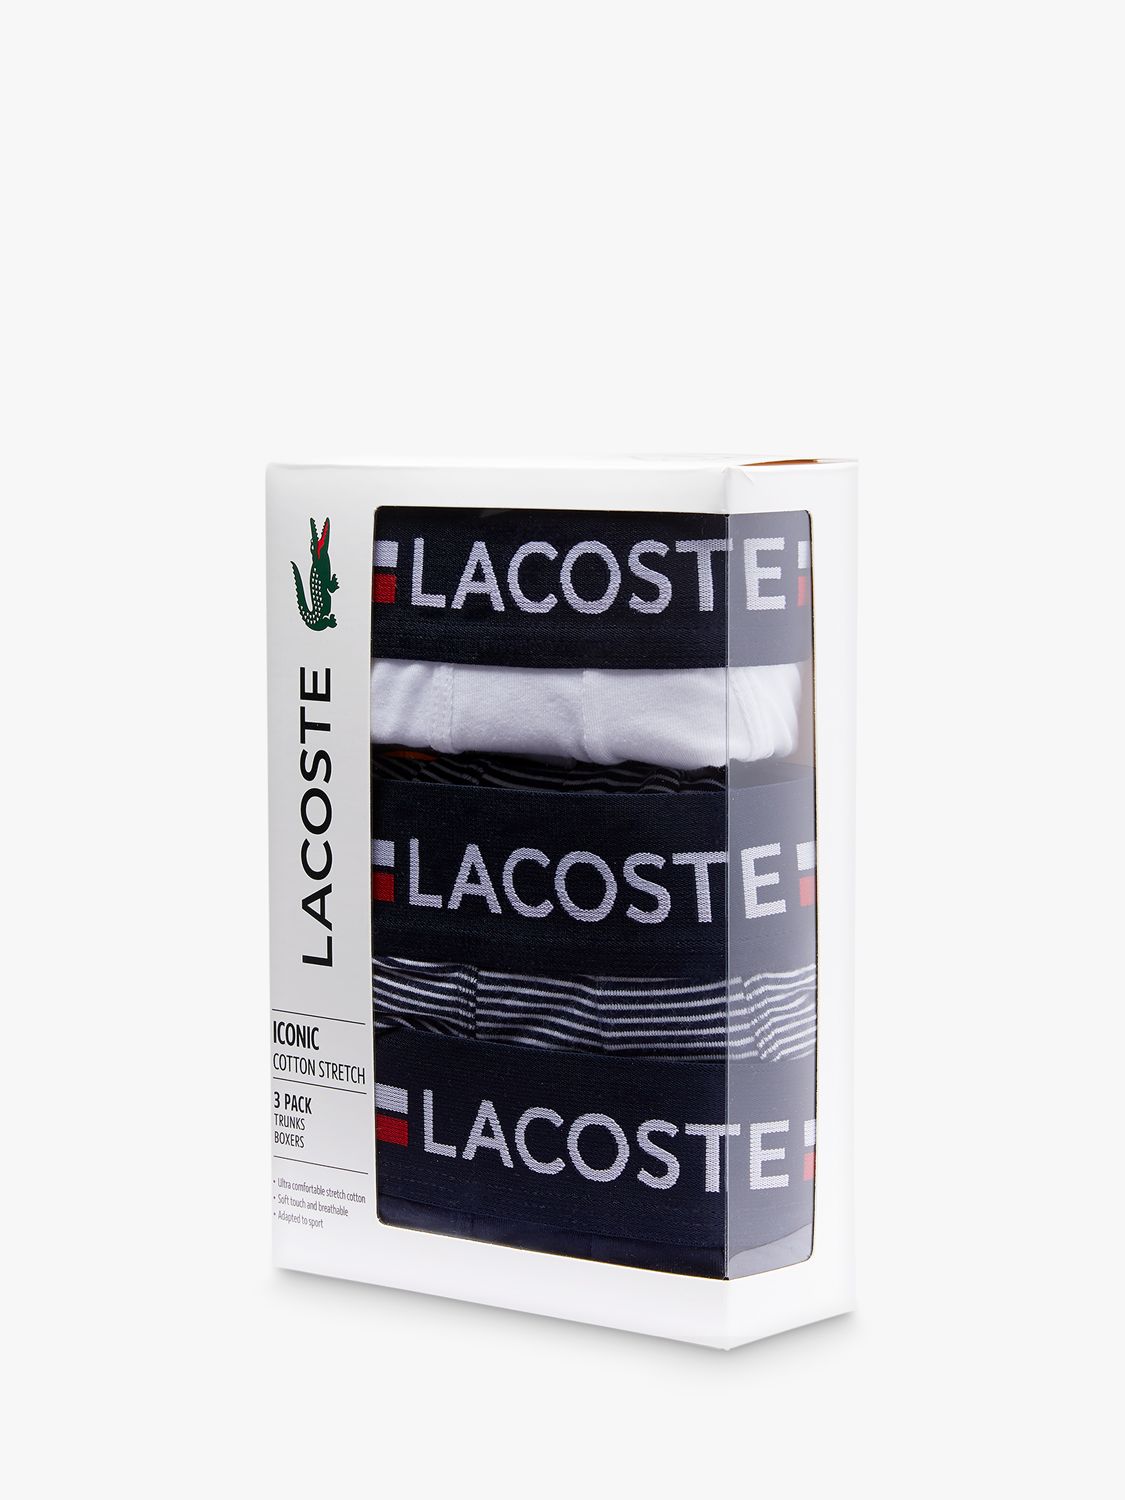 Lacoste Three Tone Colour Waistband Trunks, Pack of 3, Marine/White, S